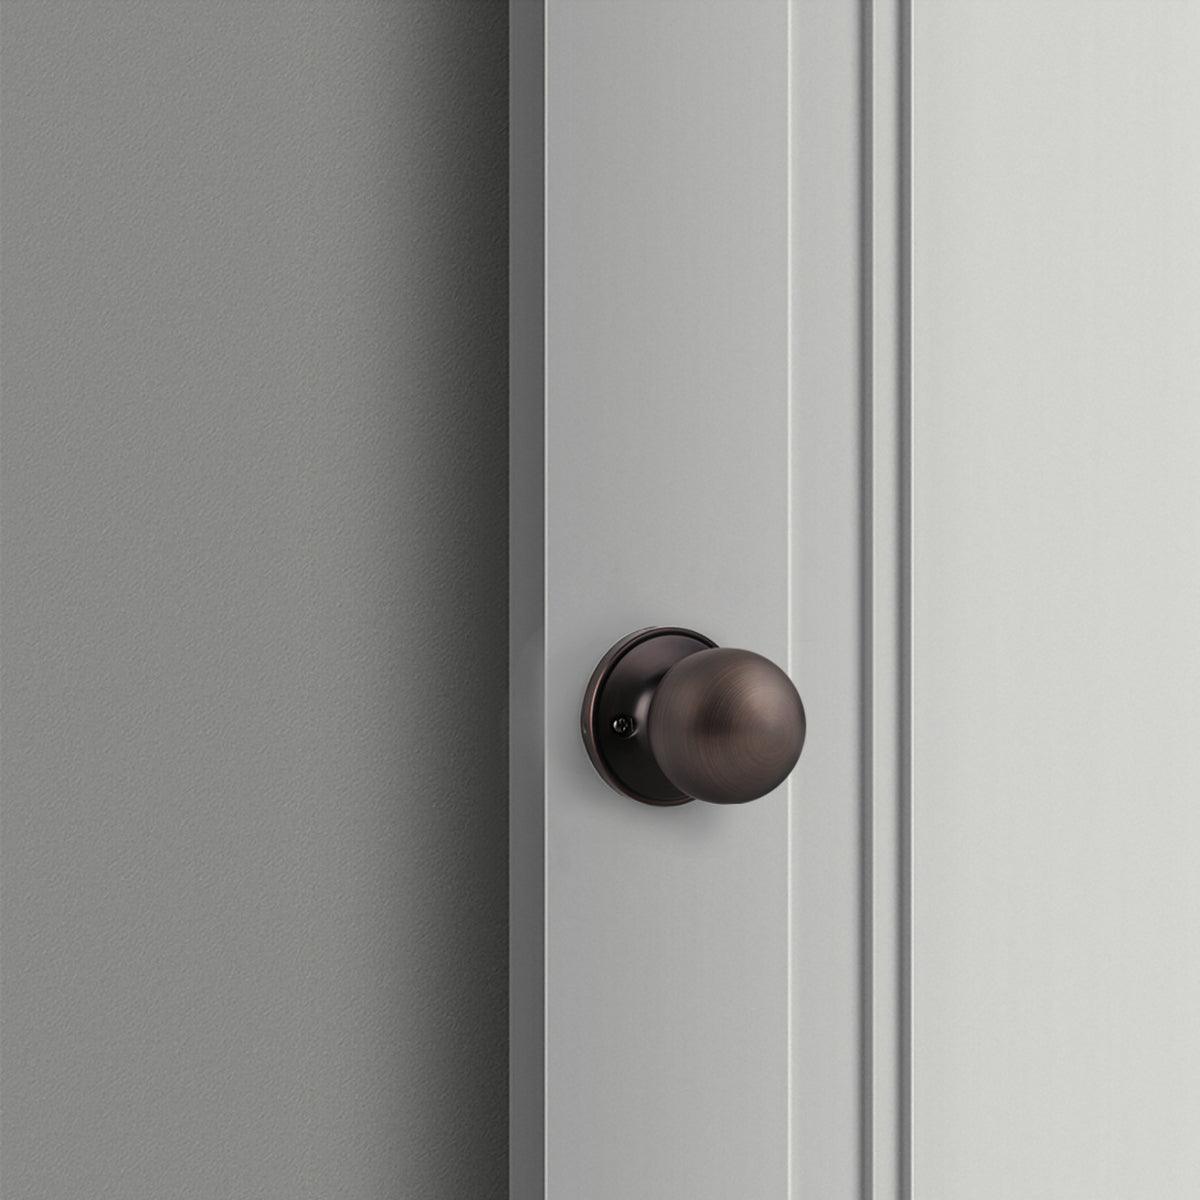 Round Ball Knobs Entrance Privacy Passage Dummy Door Lock Knob, Oil Rubbed Bronze Finish DL607ORB - Probrico